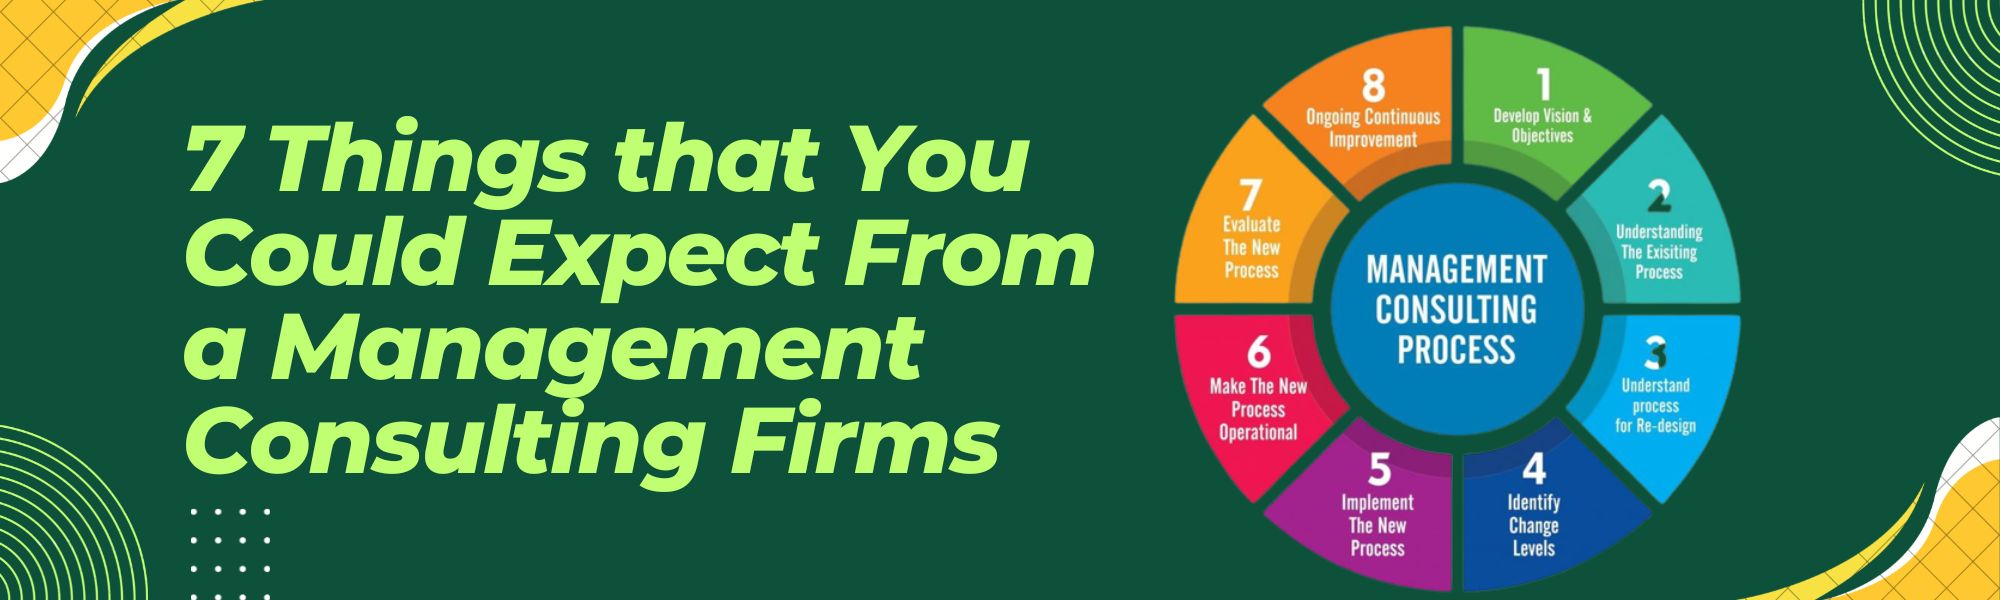 7 Things that You Could Expect From a Management Consulting Firms